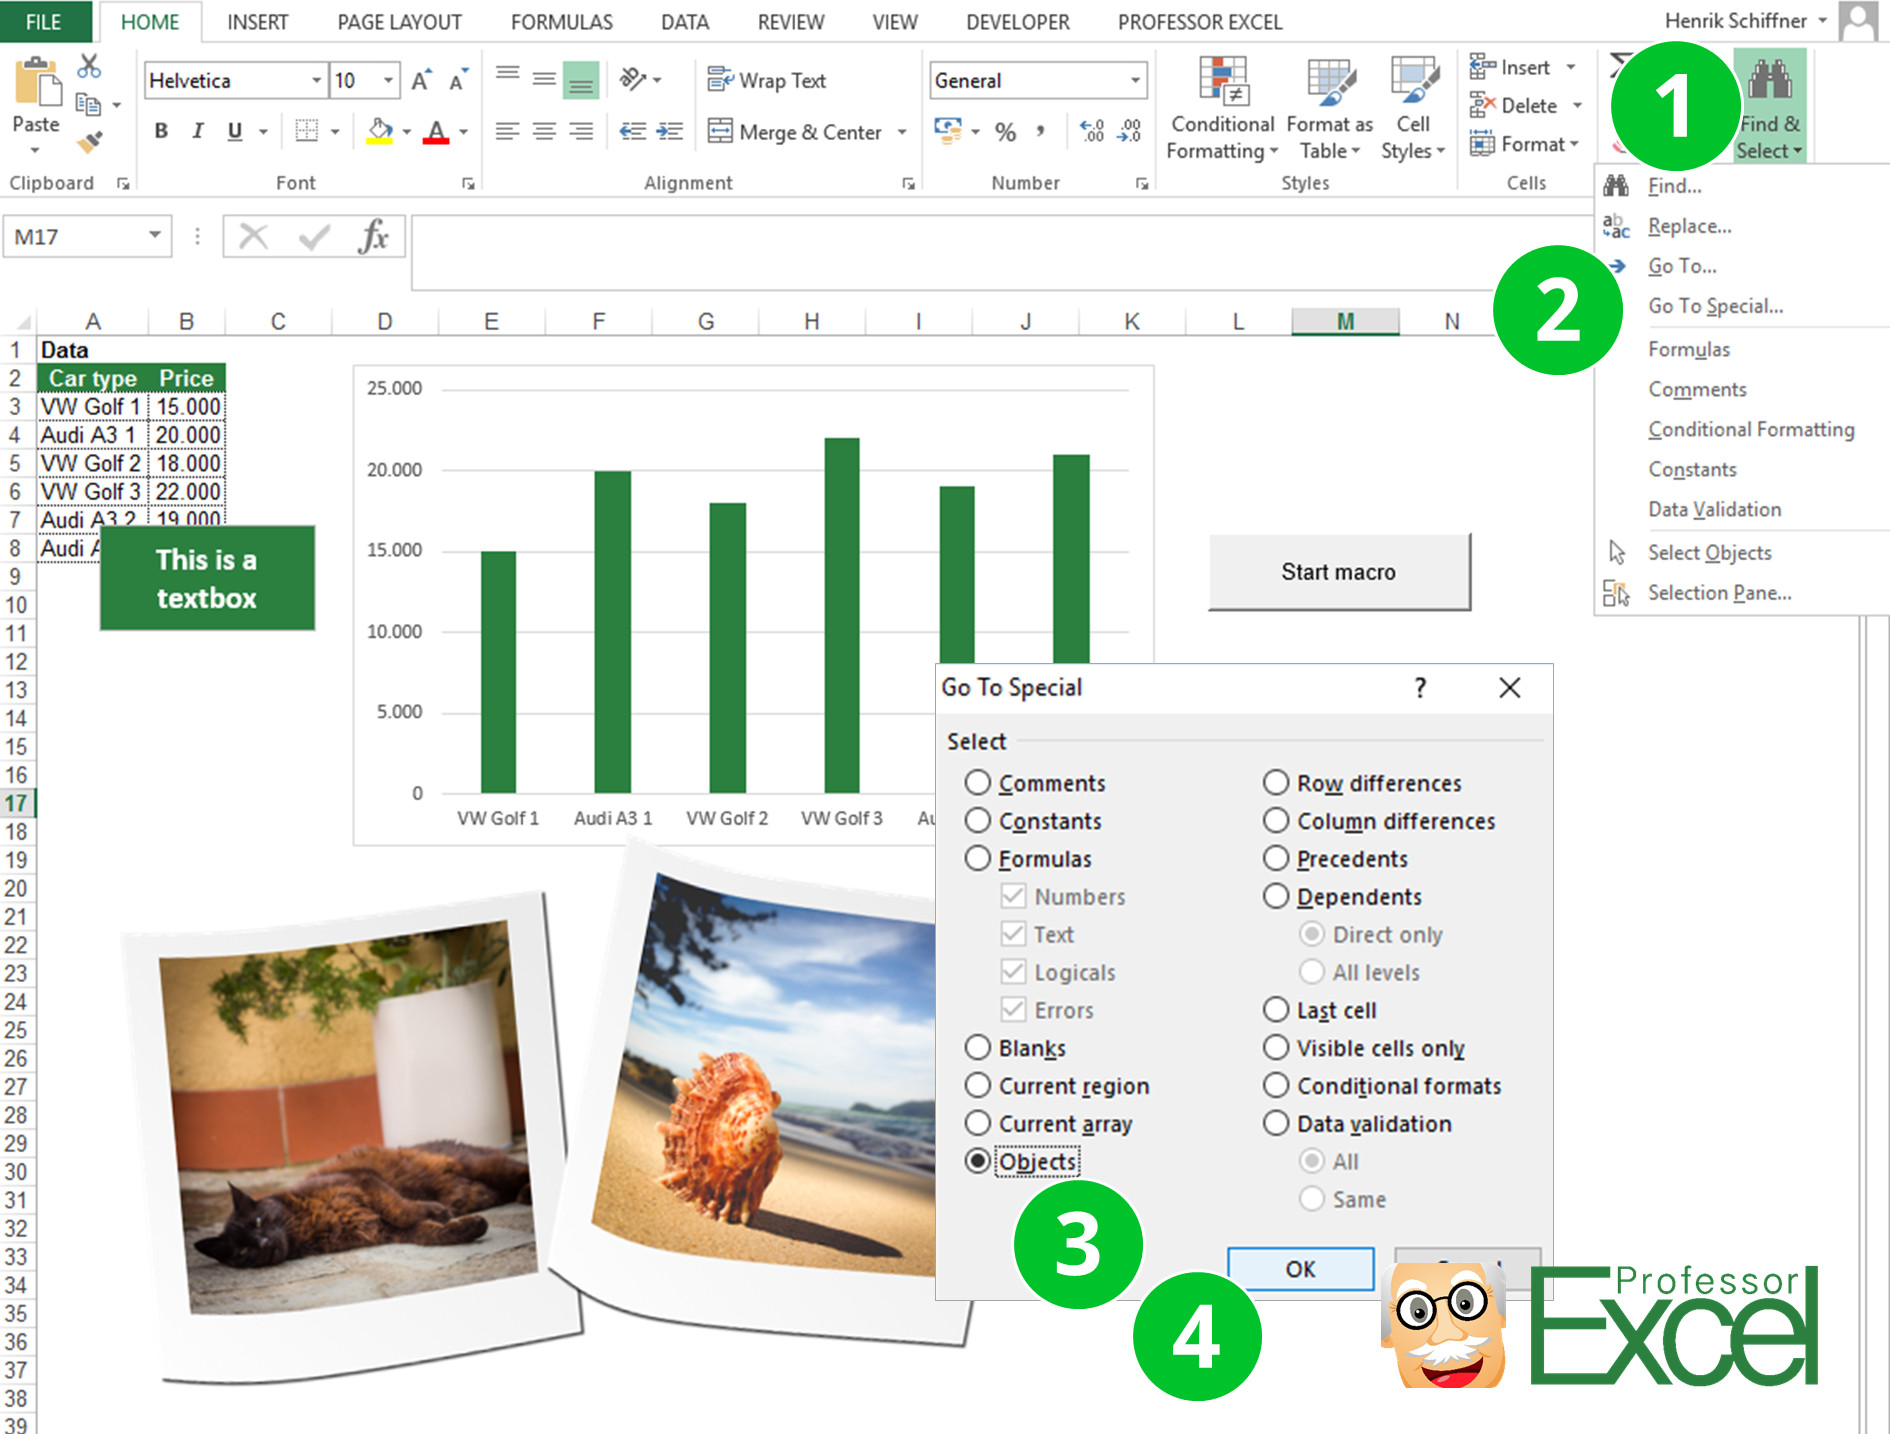 go, to, special, select, all, pictures, select all picture, objects, excel